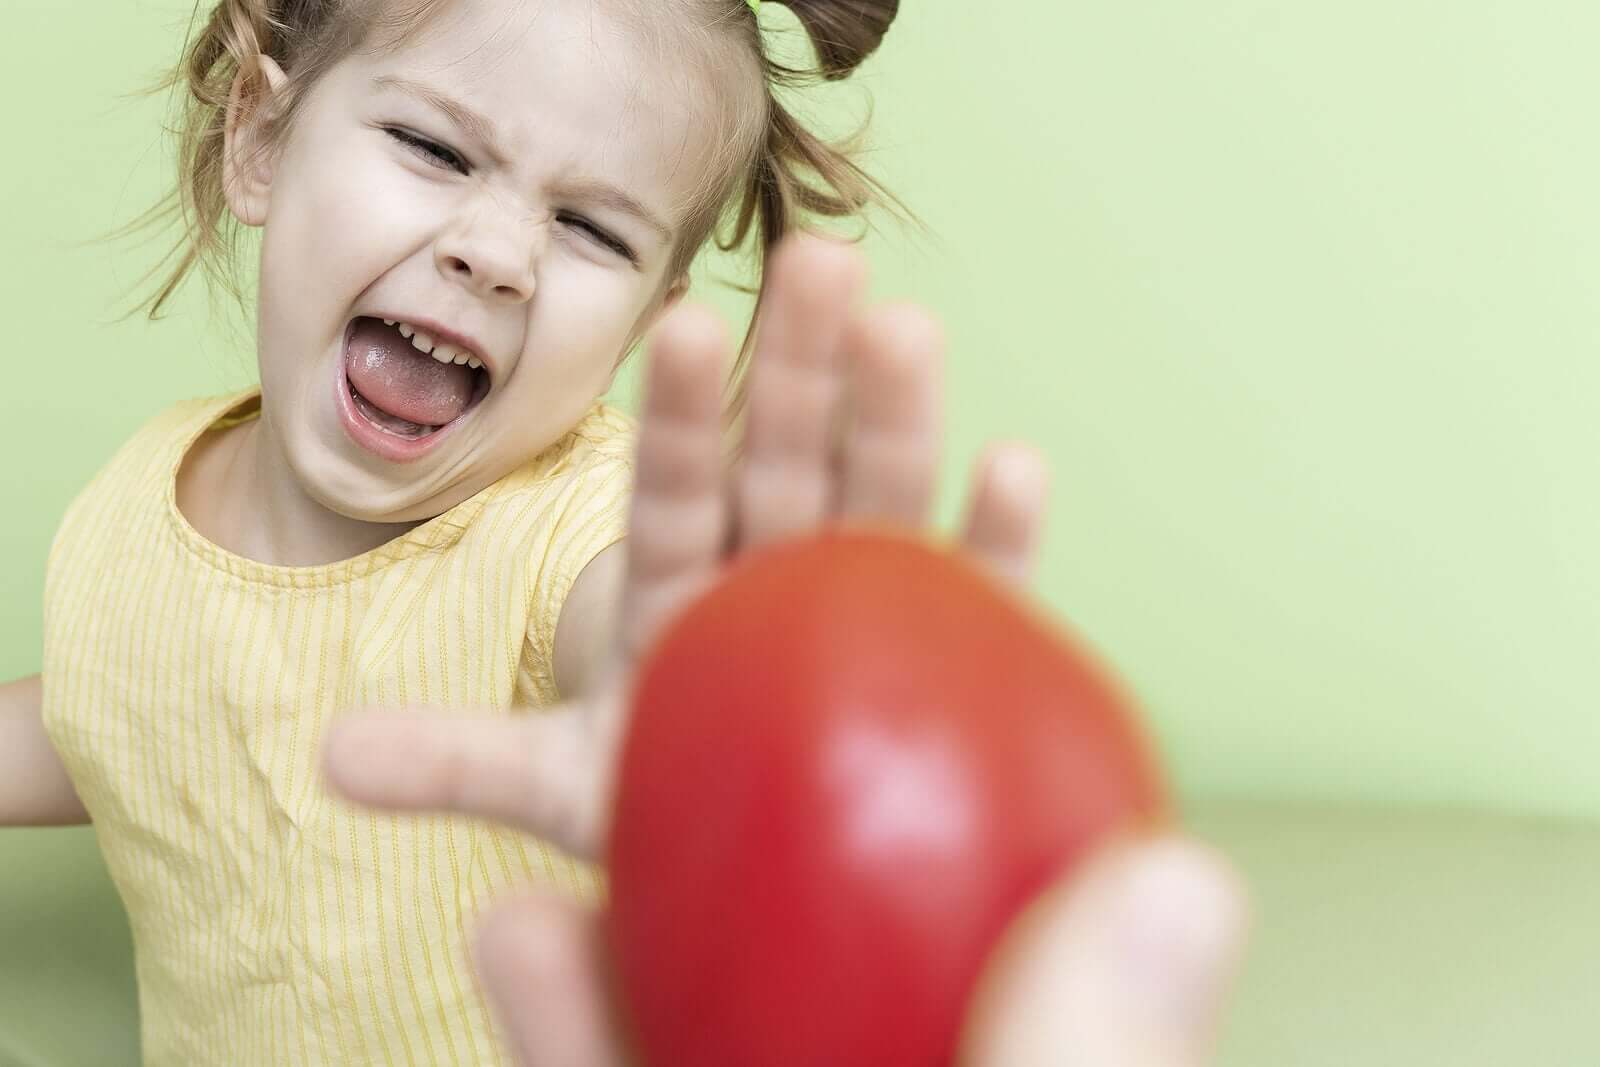 My Child Is Scared of Choking While Eating: What Can I Do?